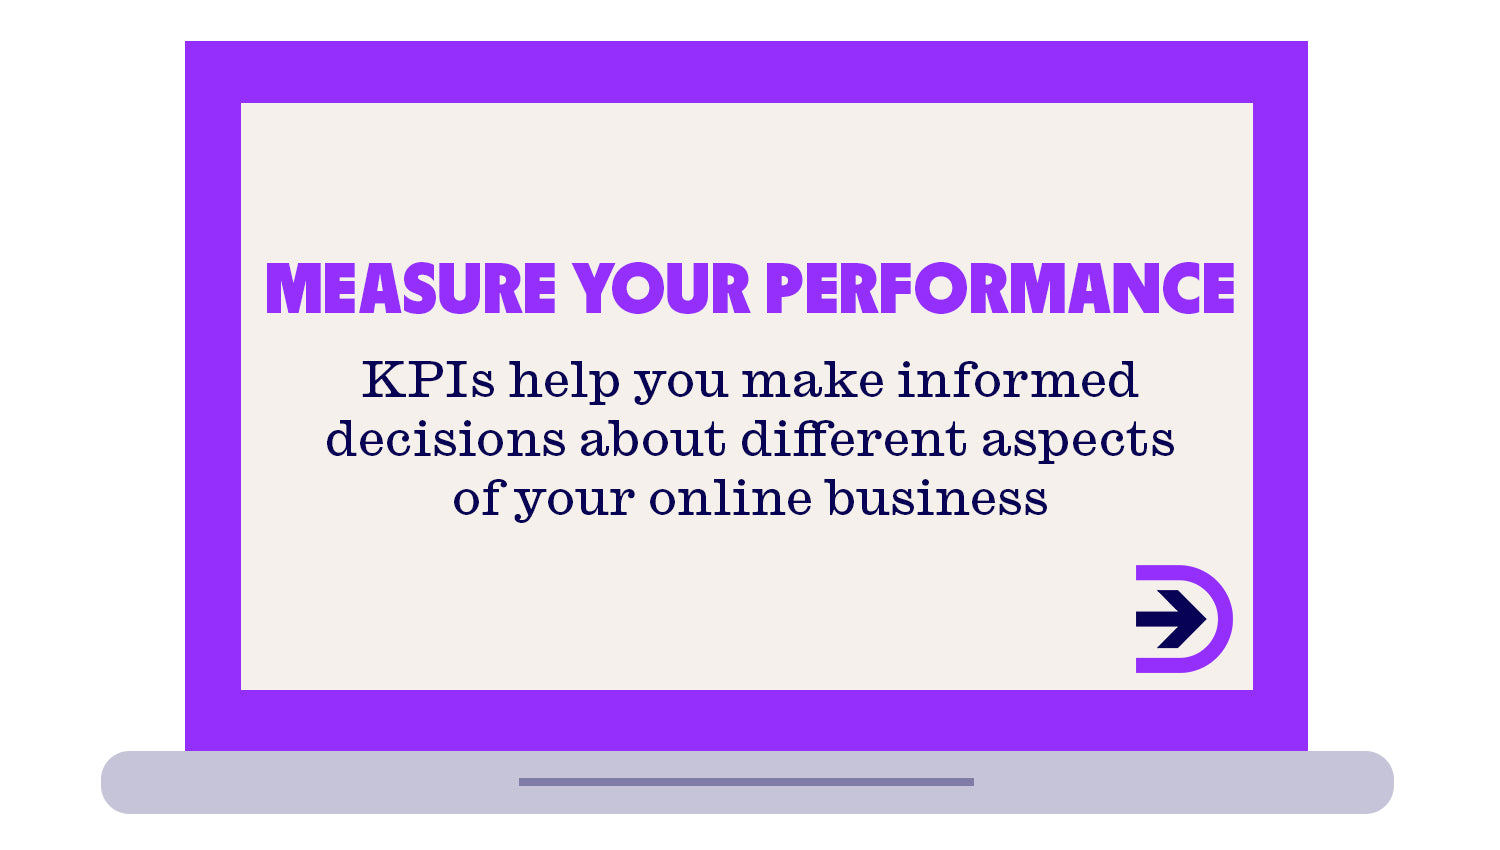 Make informed decisions about your business by paying attention to key performance indicators (KPIs).